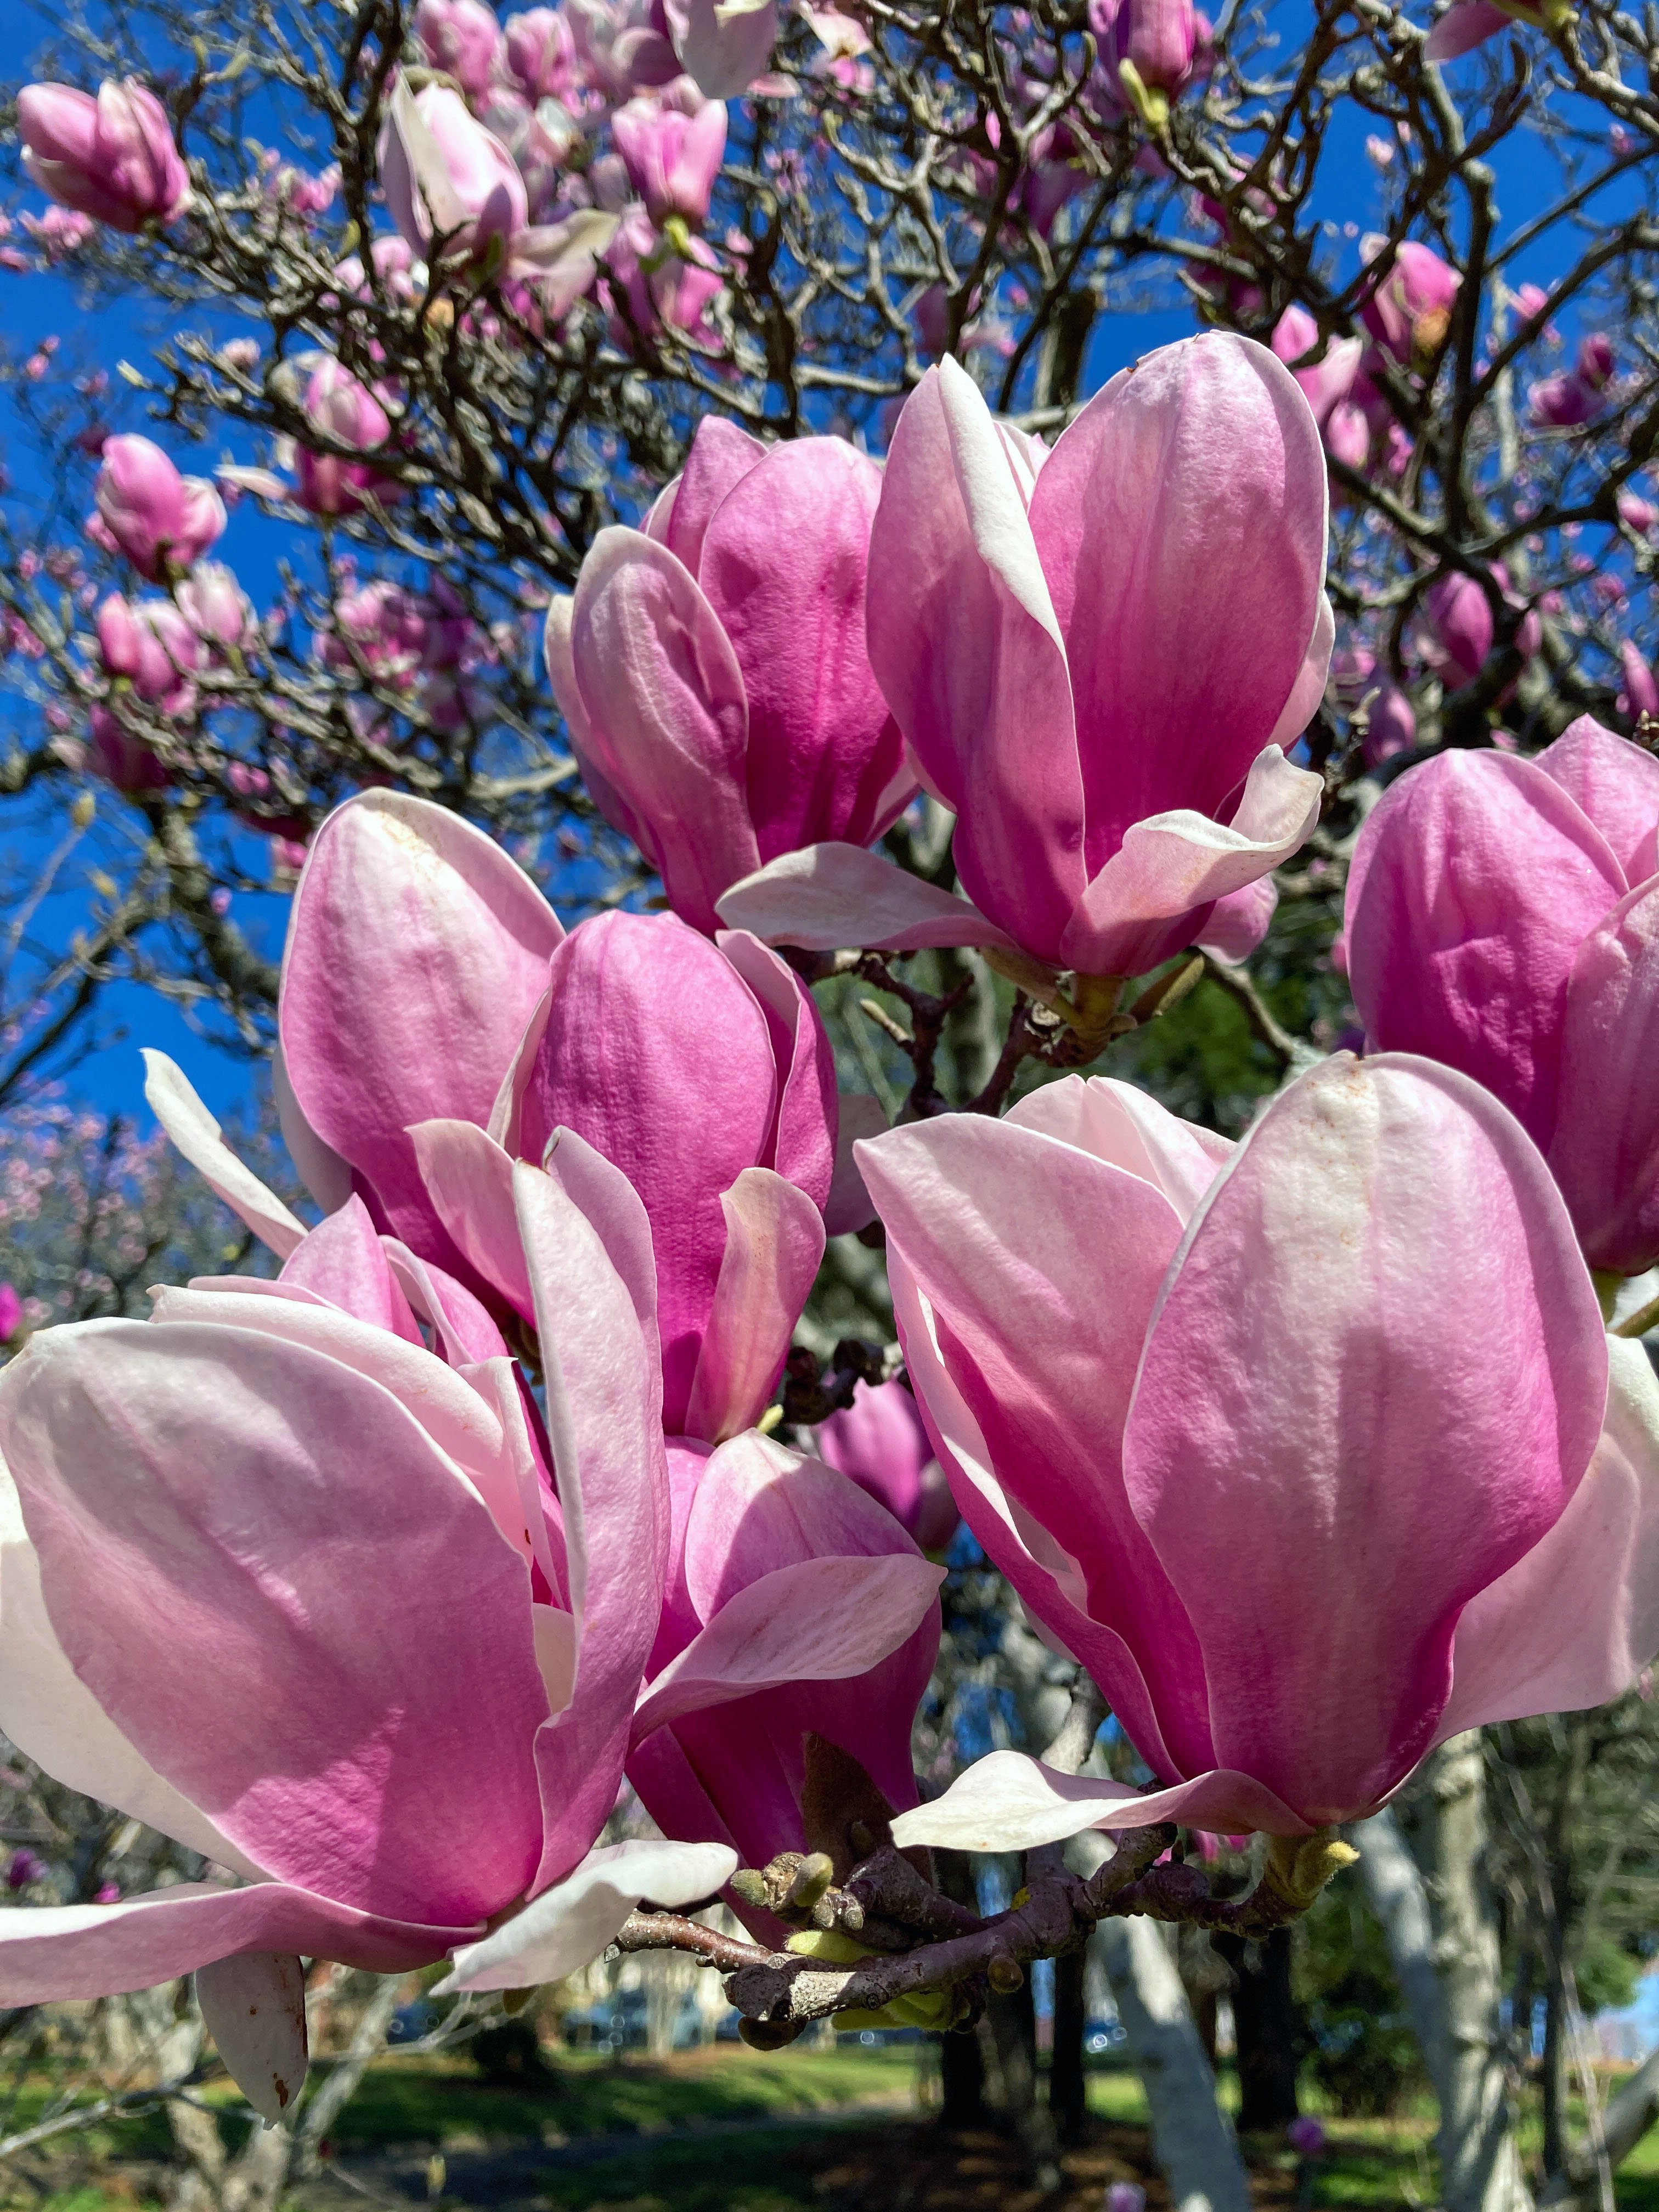 Daily Snap #7: Saucer Magnolia - Large blooms on saucer magnolia (tulip magnolia) tree in Coleman Hill Park. It's one of the most popular flowering trees in the United States.